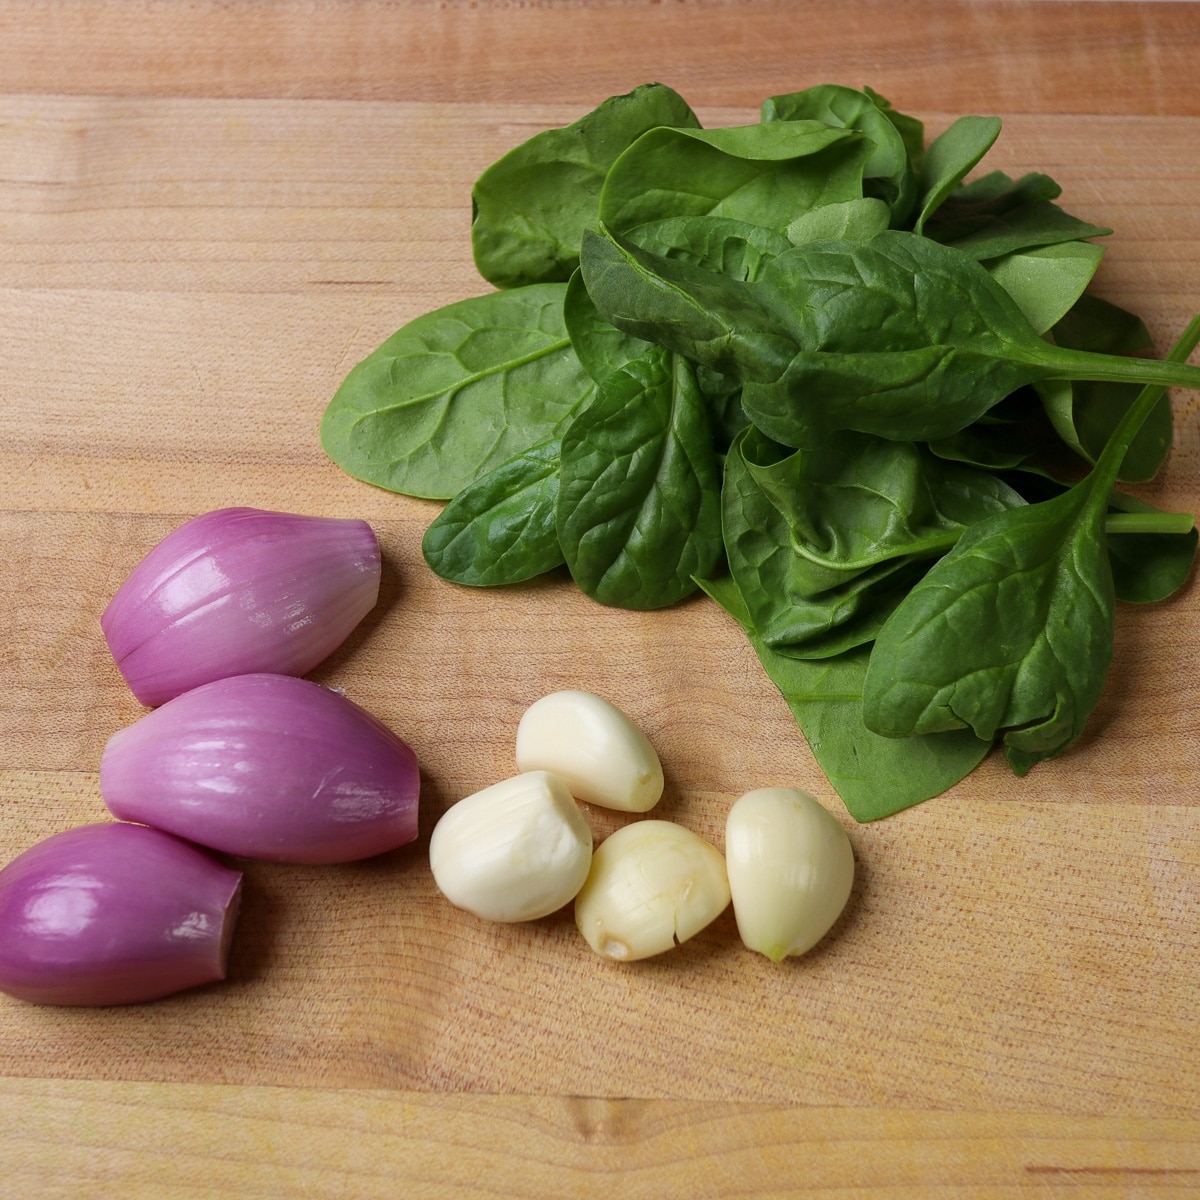 shallots, spinach and garlic on a cutting board
